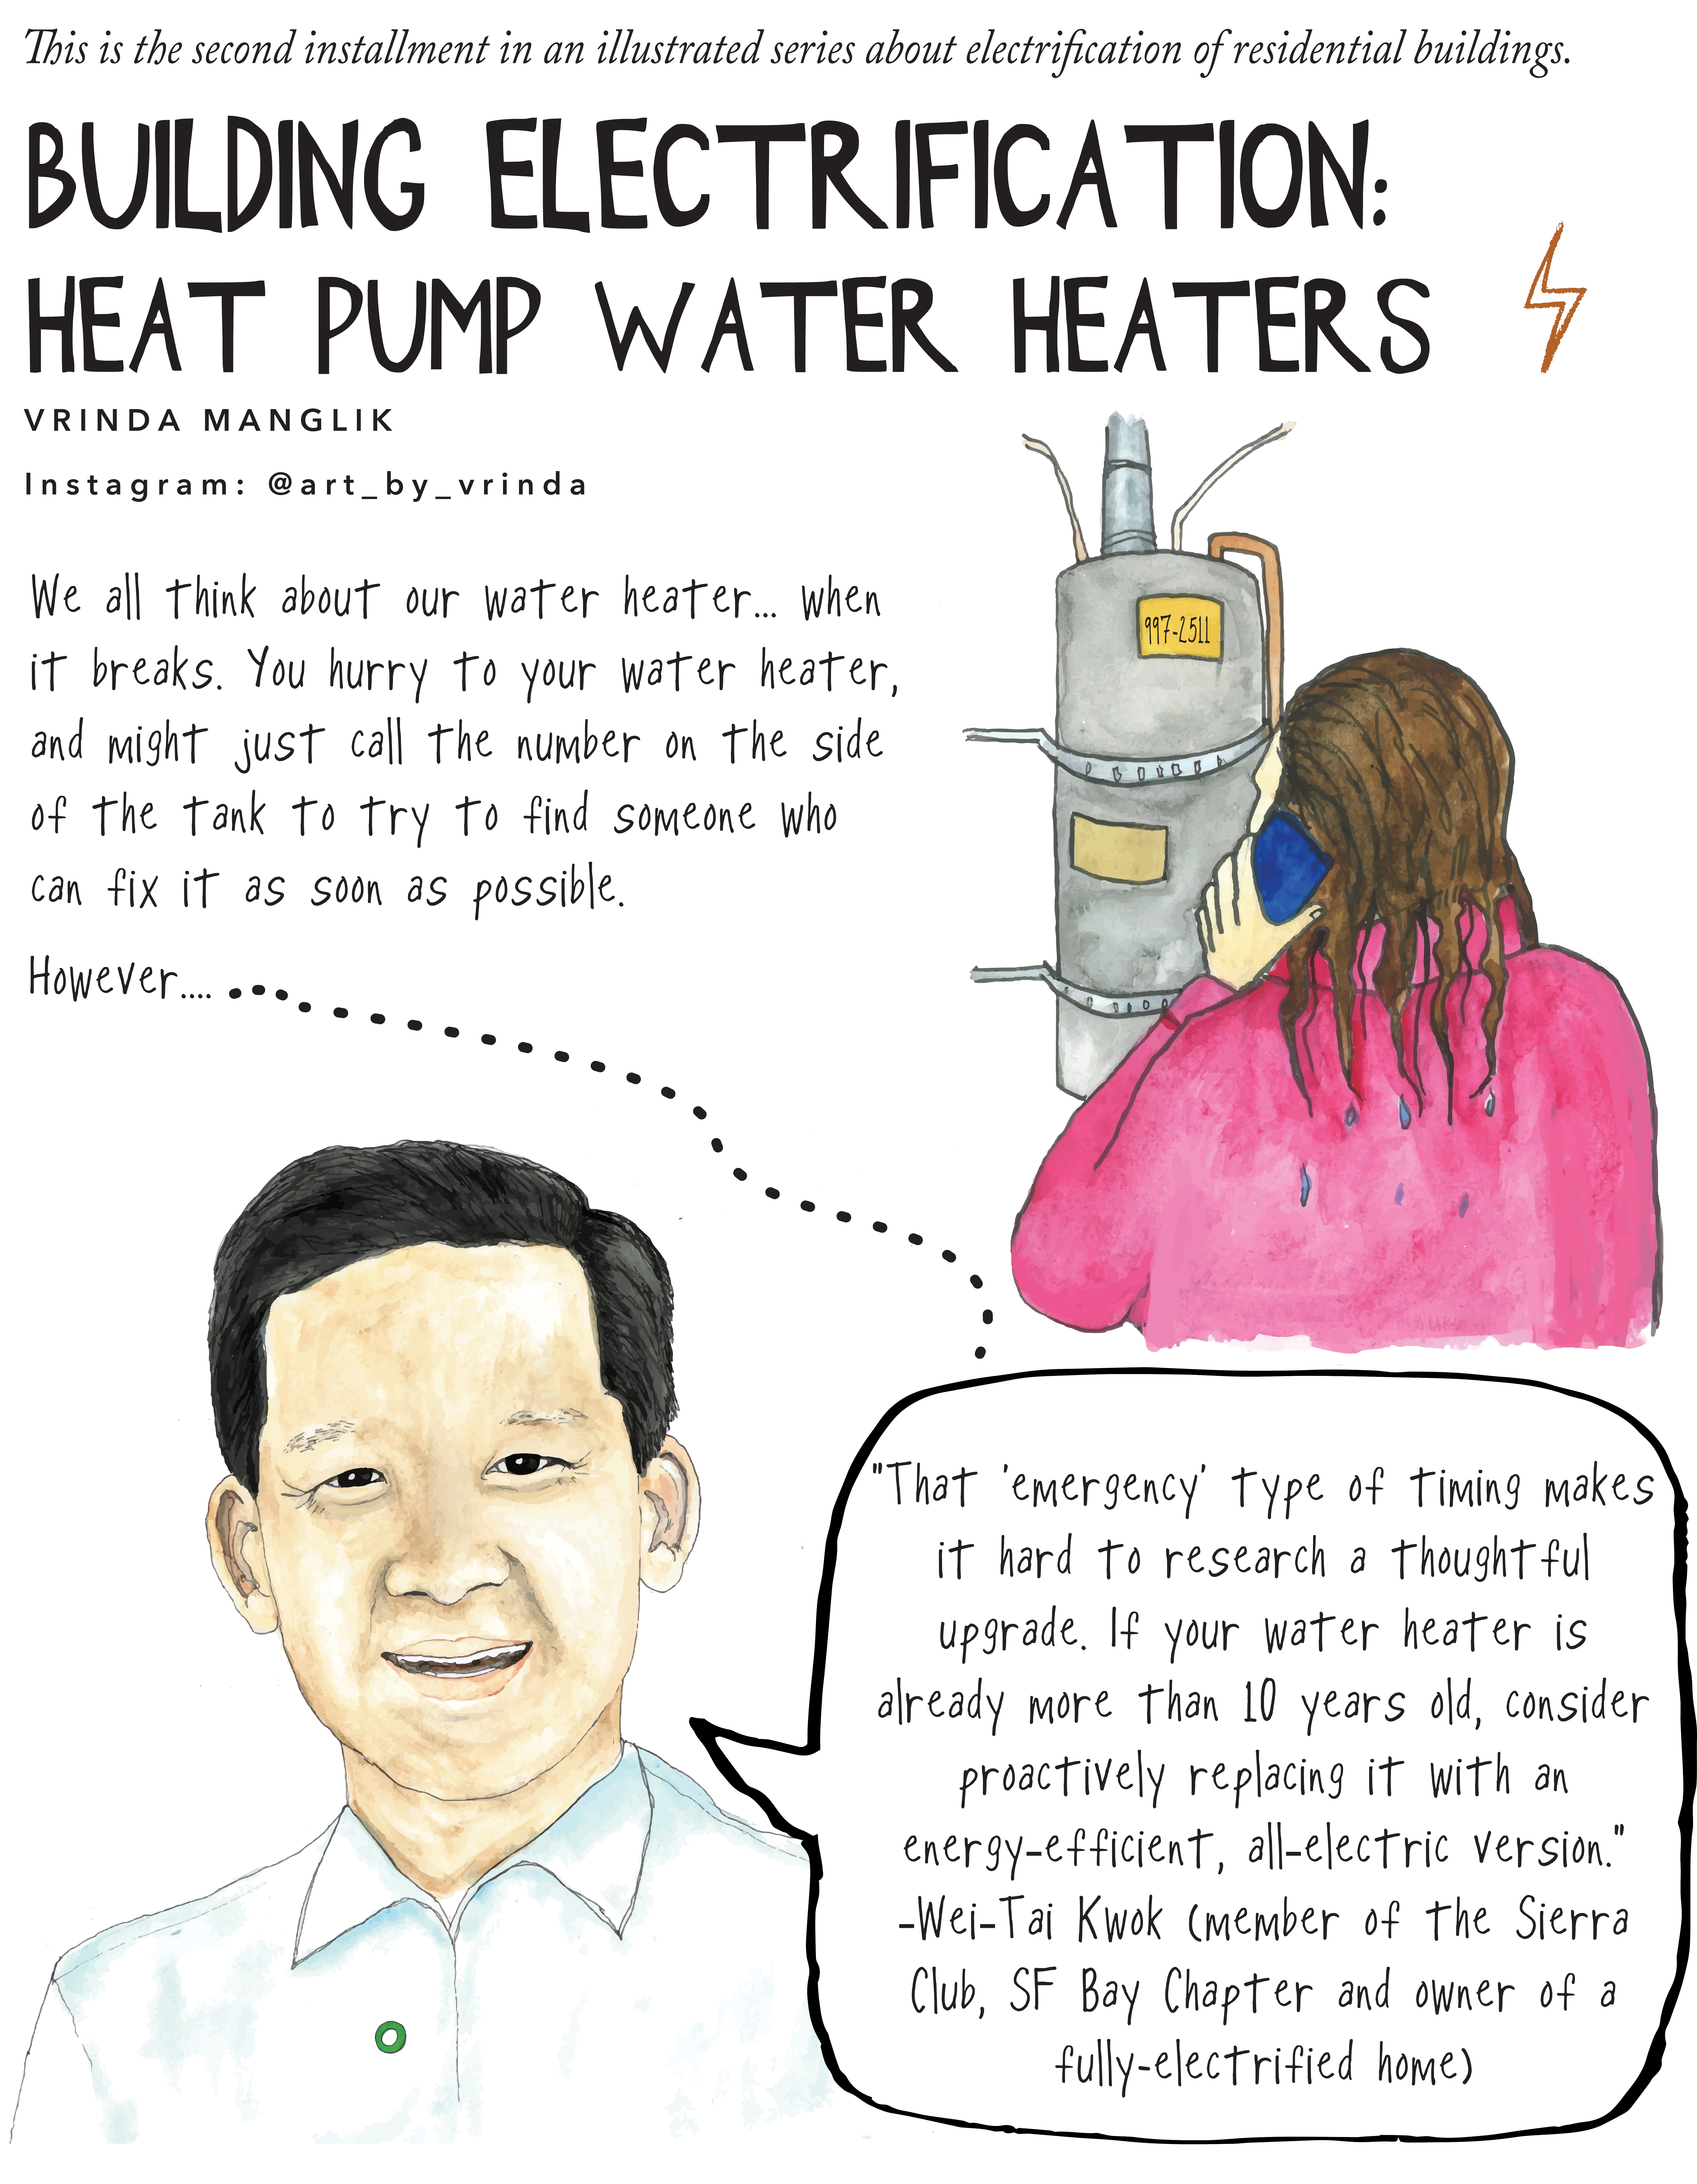 Illustrated series showing the benefits of electric appliances including heat pump water heaters.